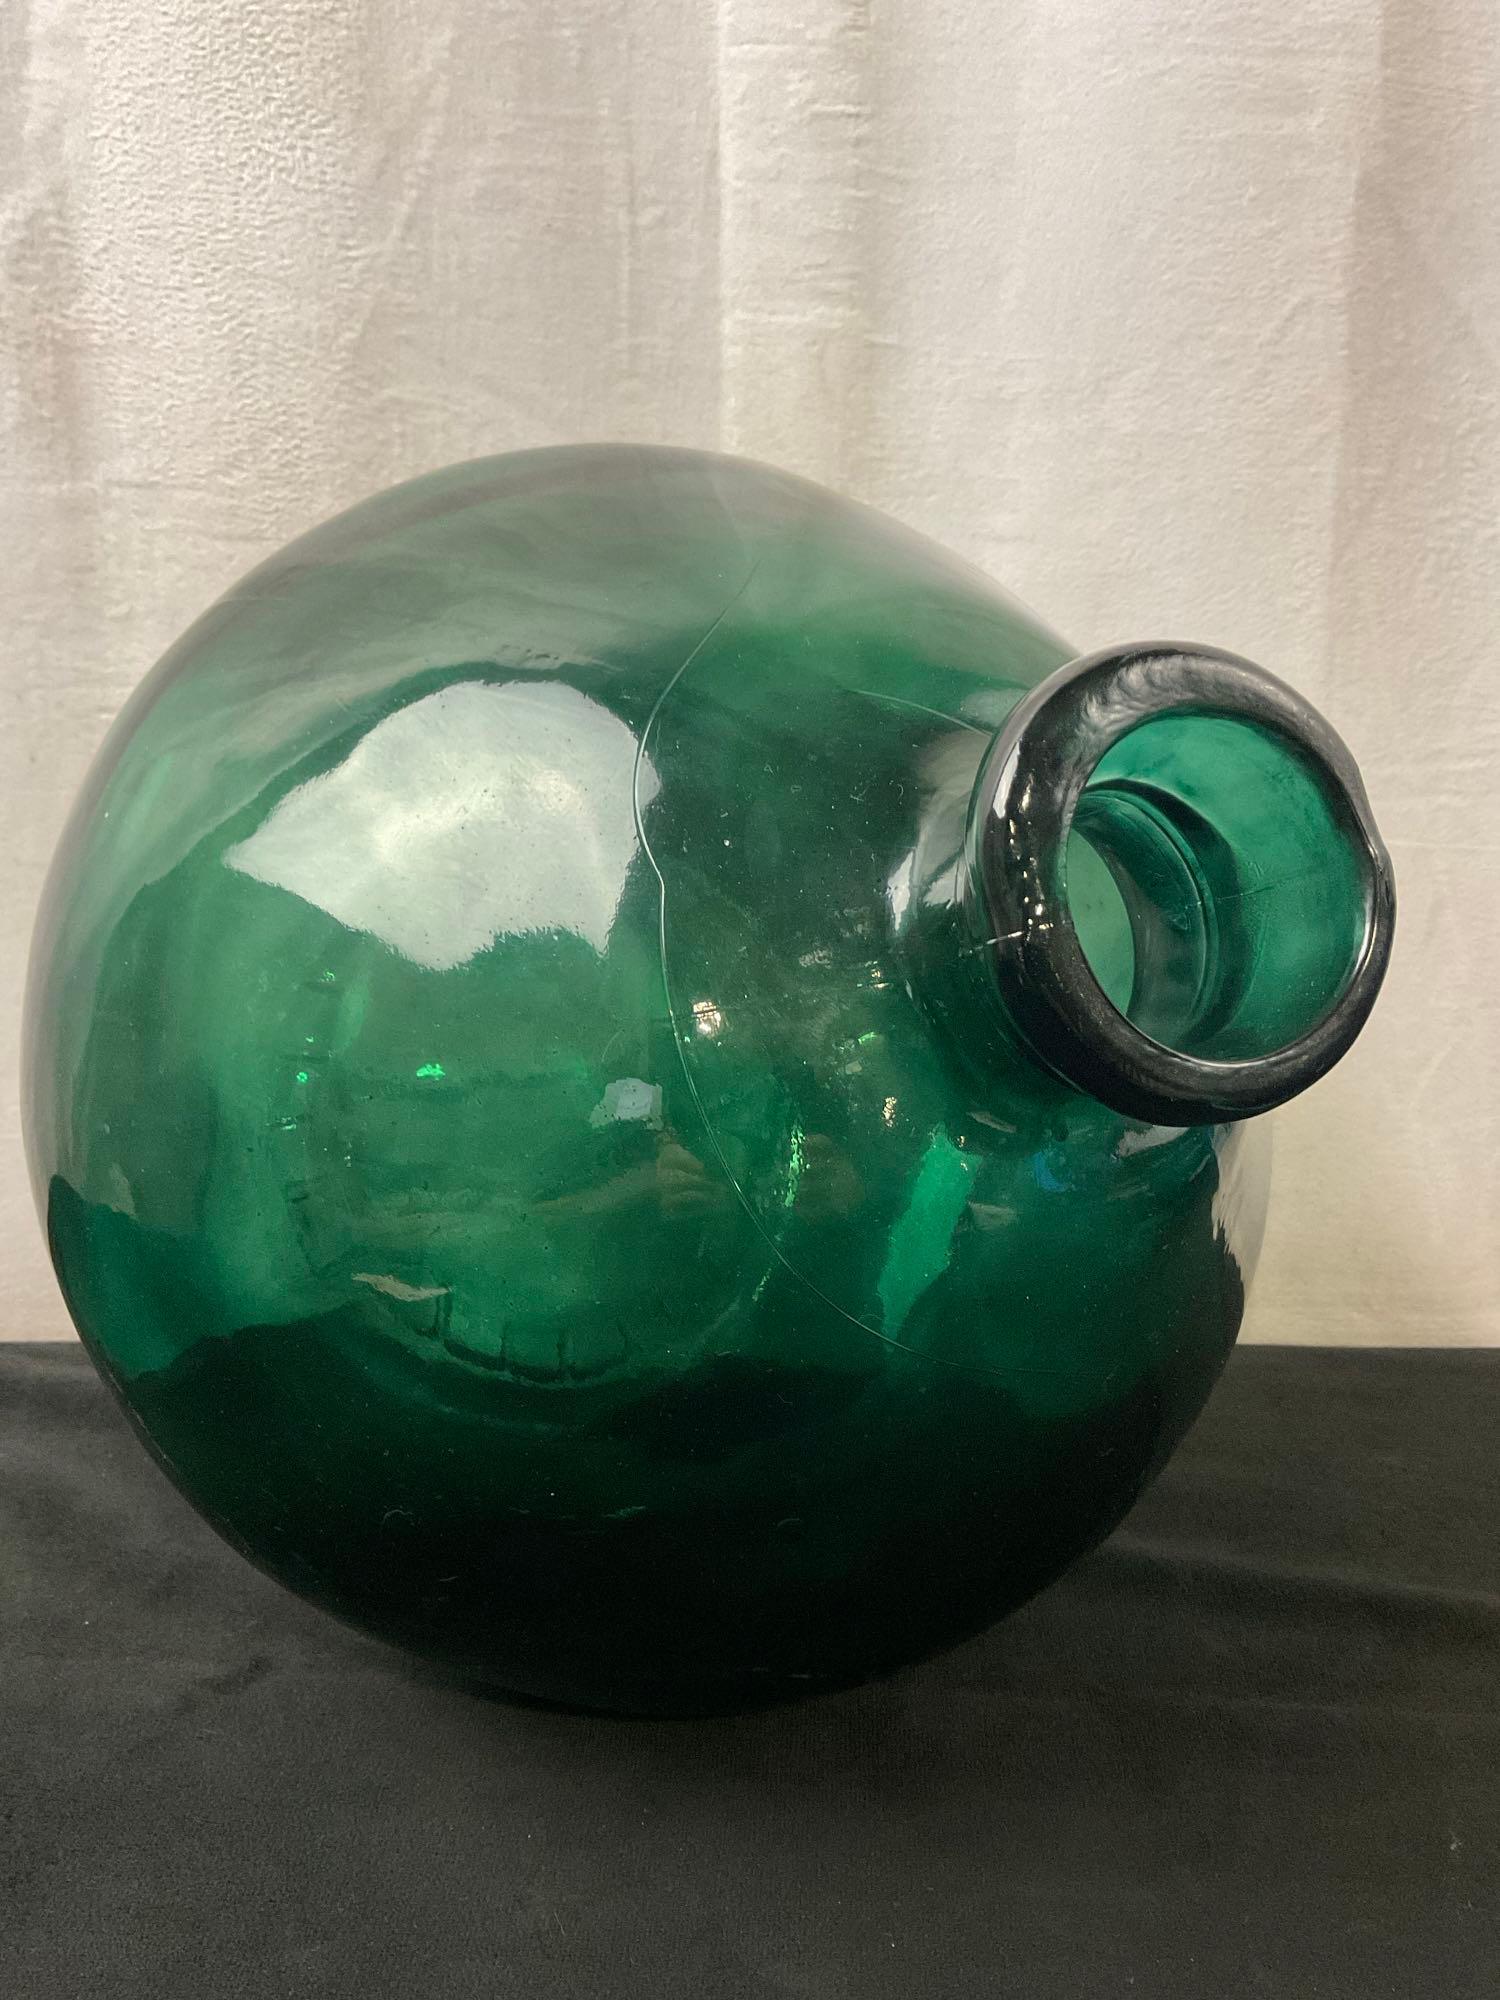 Large Handblown Recycled Round Vase Dark Green & Blue/Clear/Teal Large Vase w/ Frilled Edge